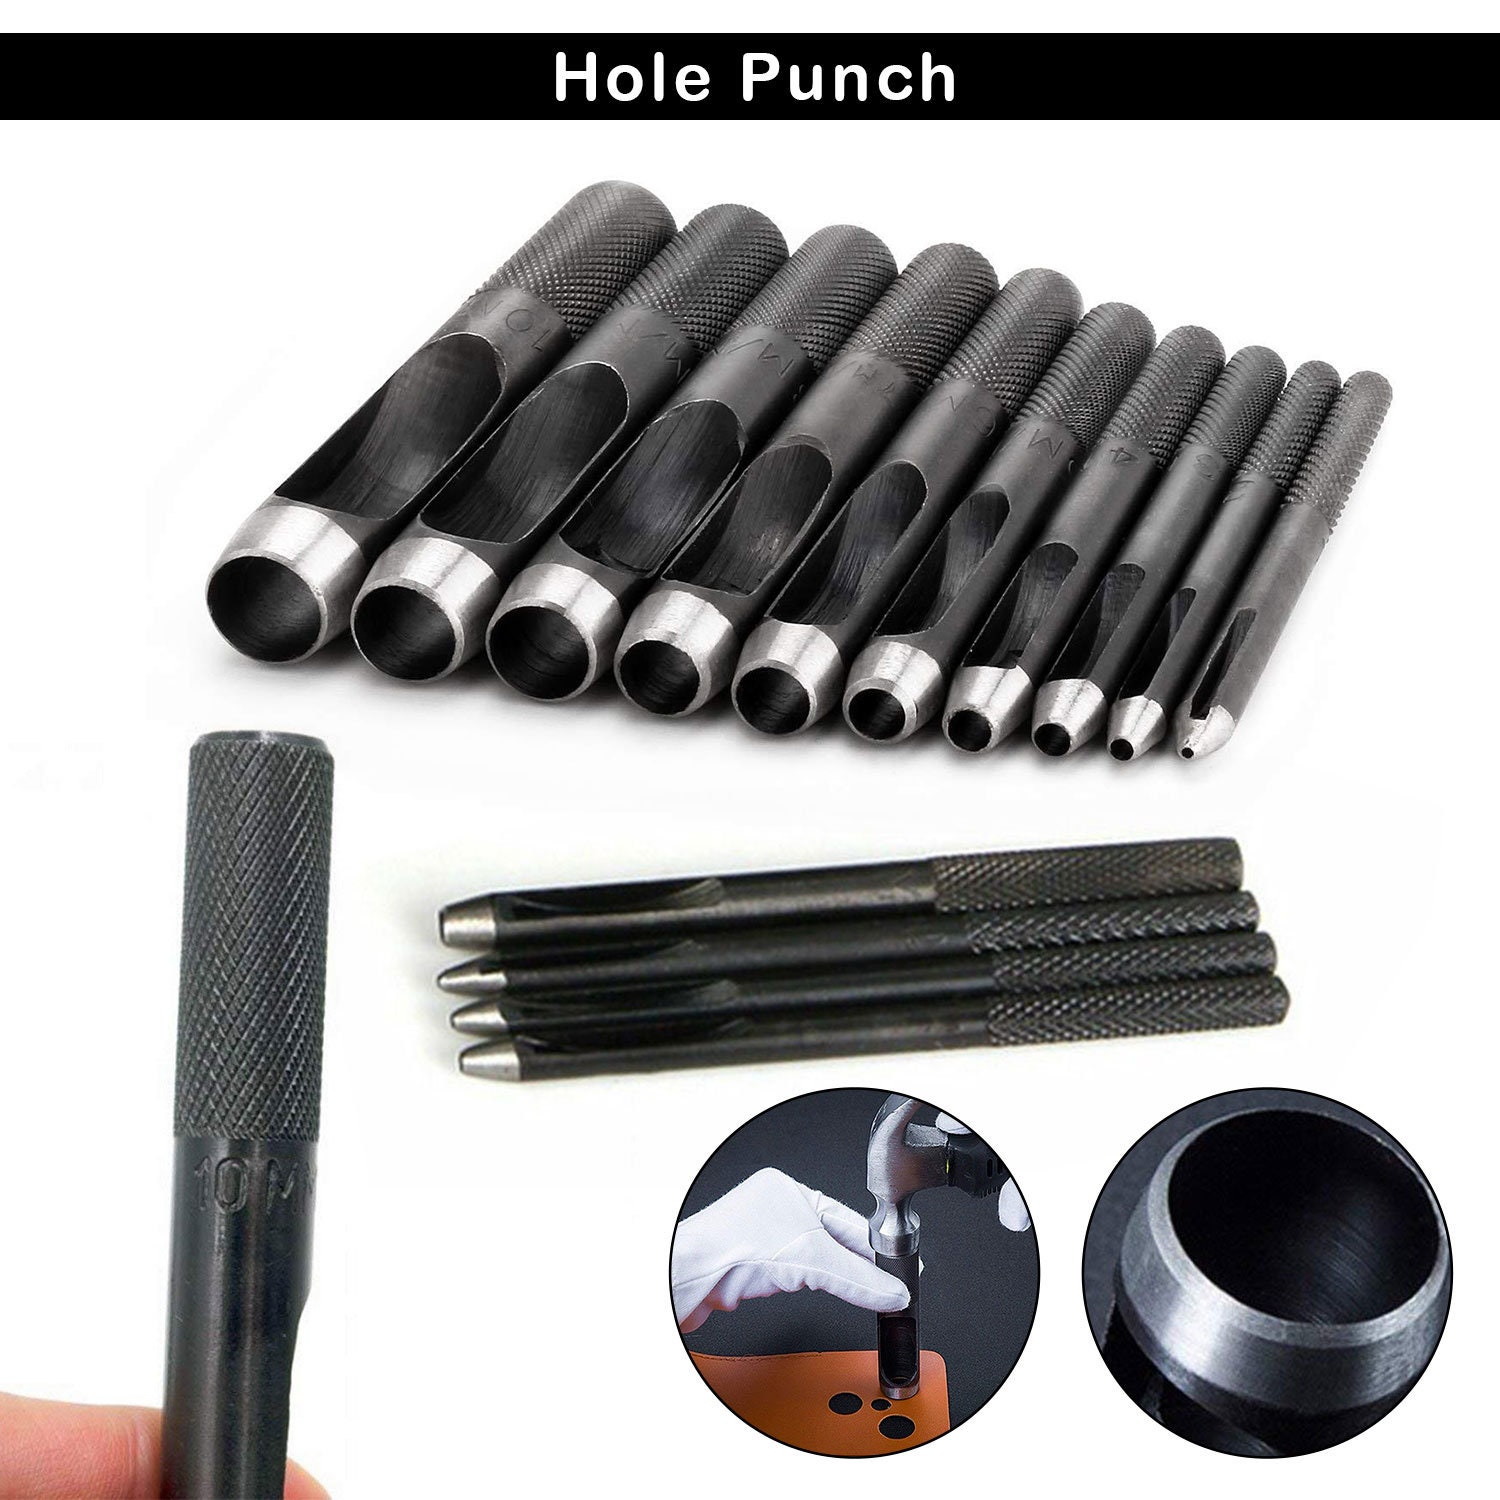 Hollow Punch Kit Leather Punches Tools Hole Punch Set Gasket Punch